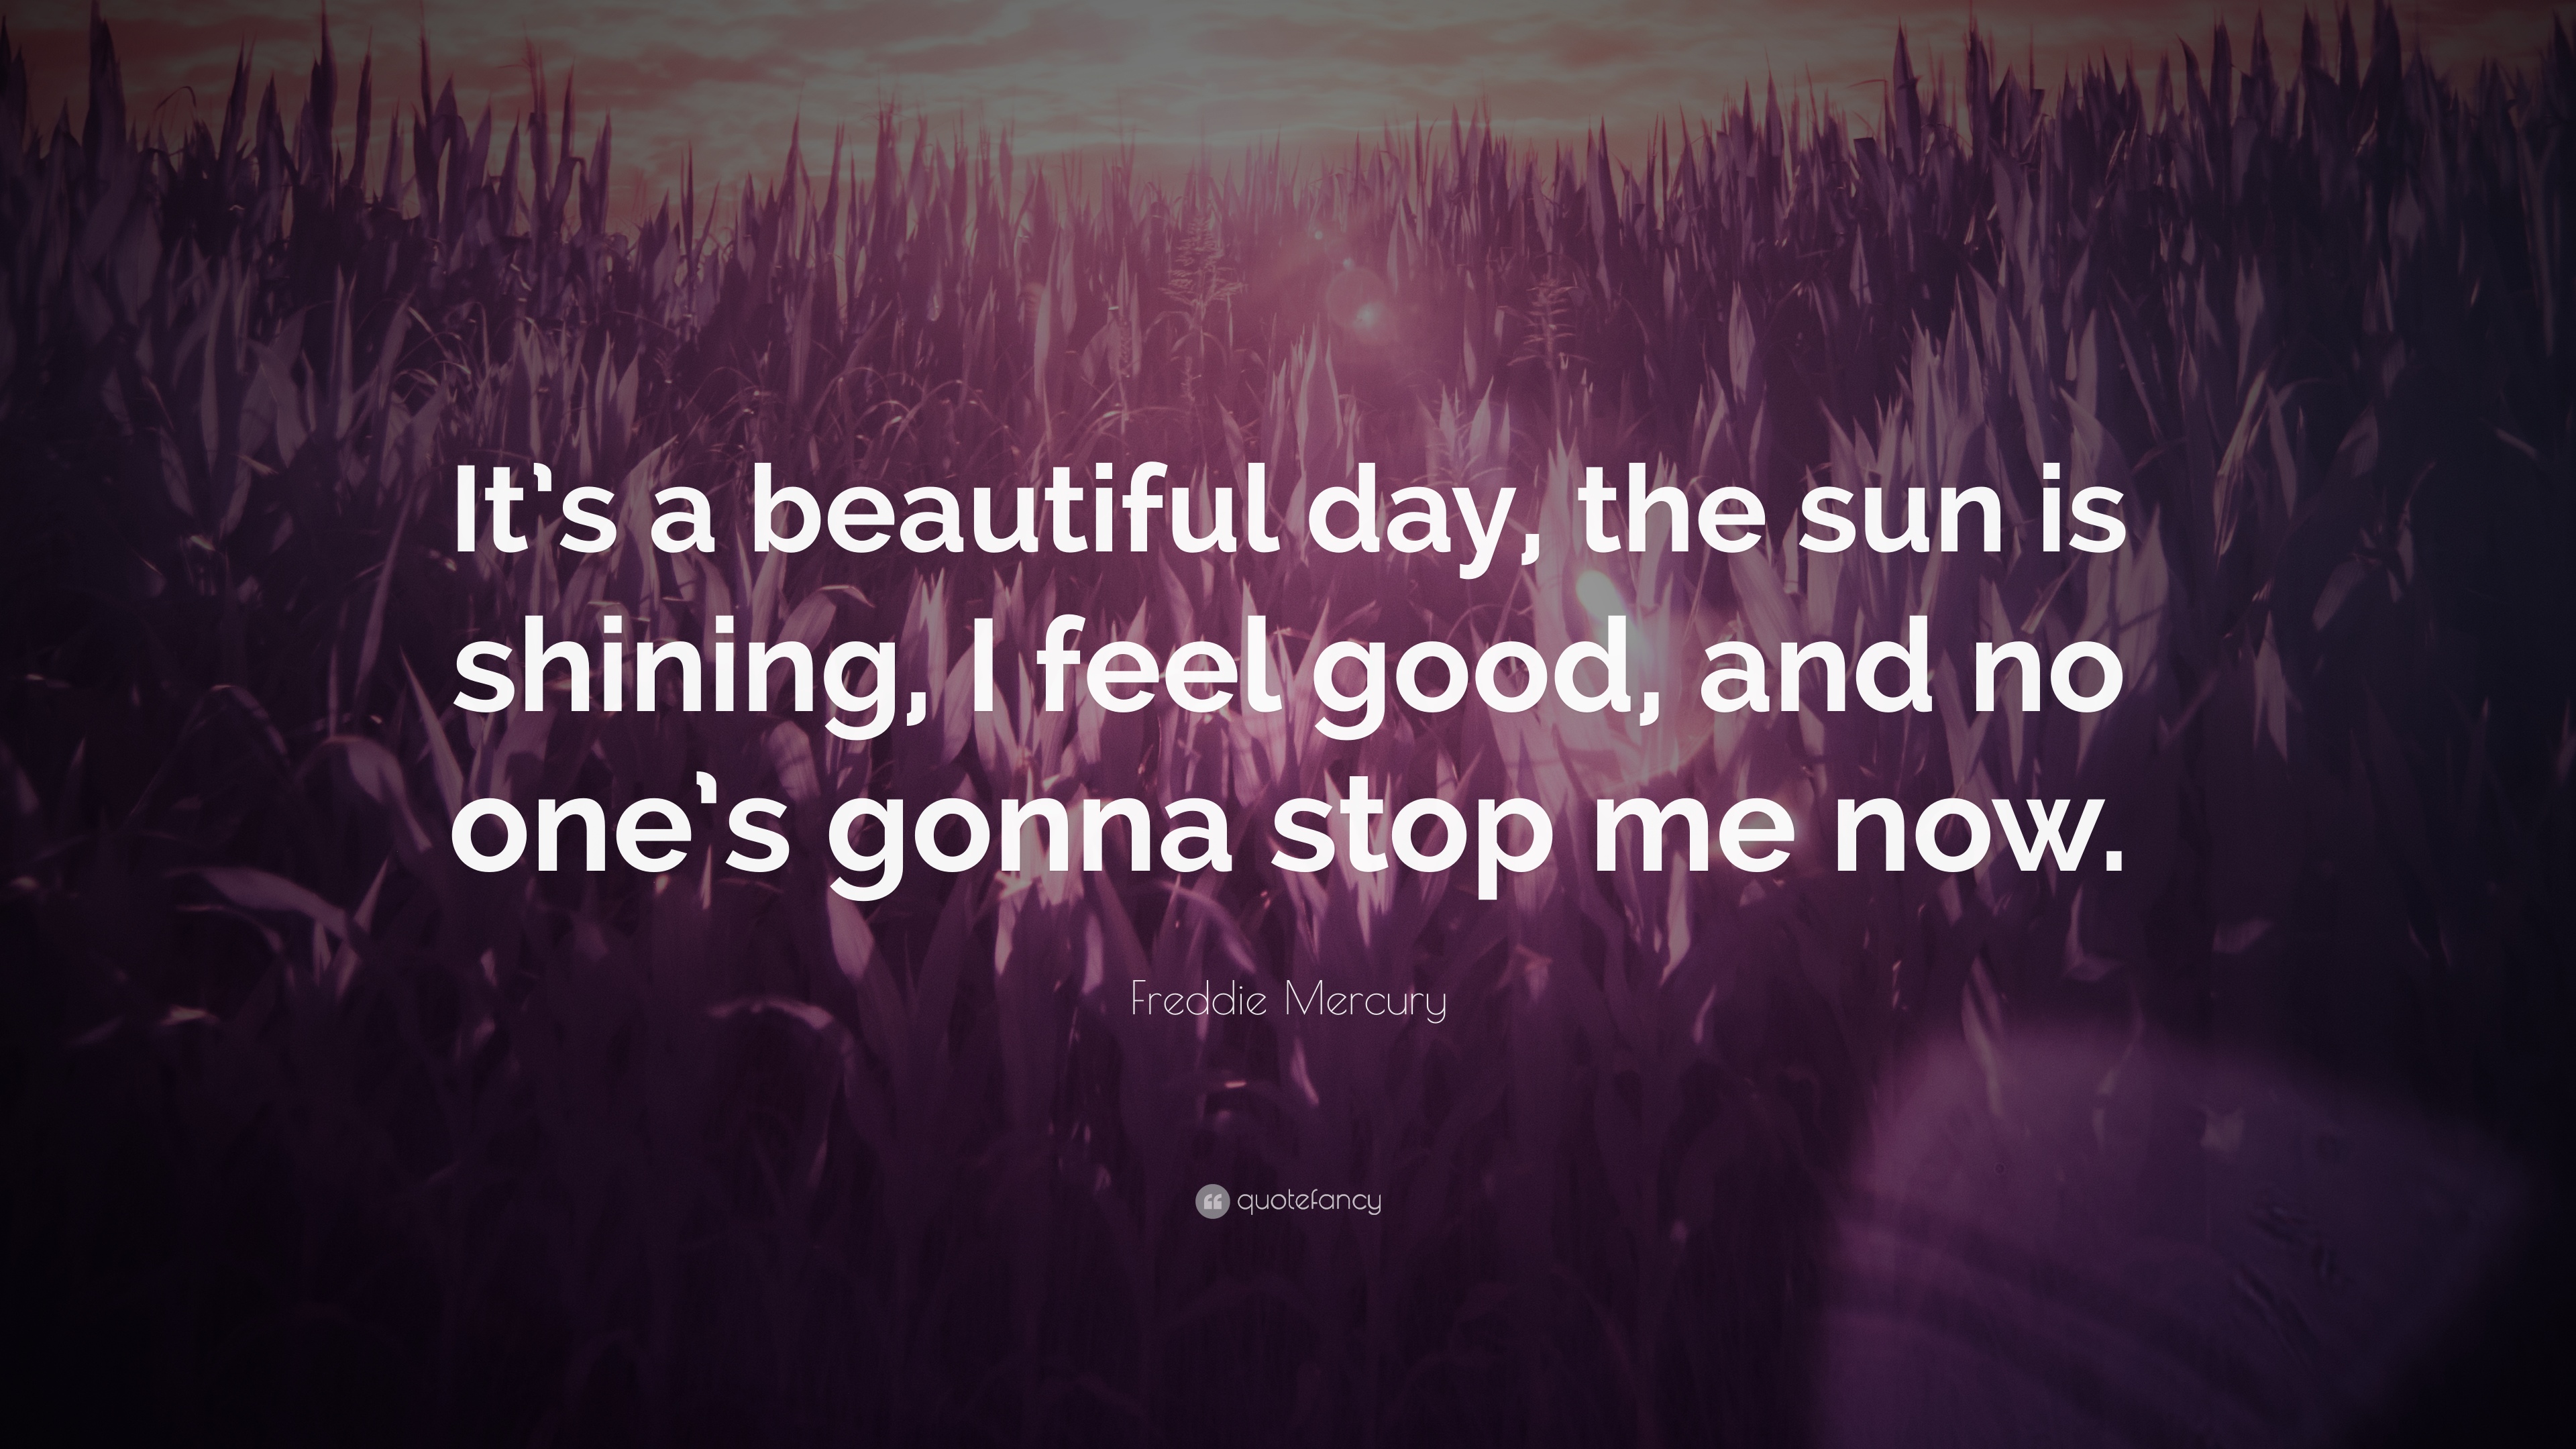 Freddie Mercury Quote: “It's a beautiful day, the sun is